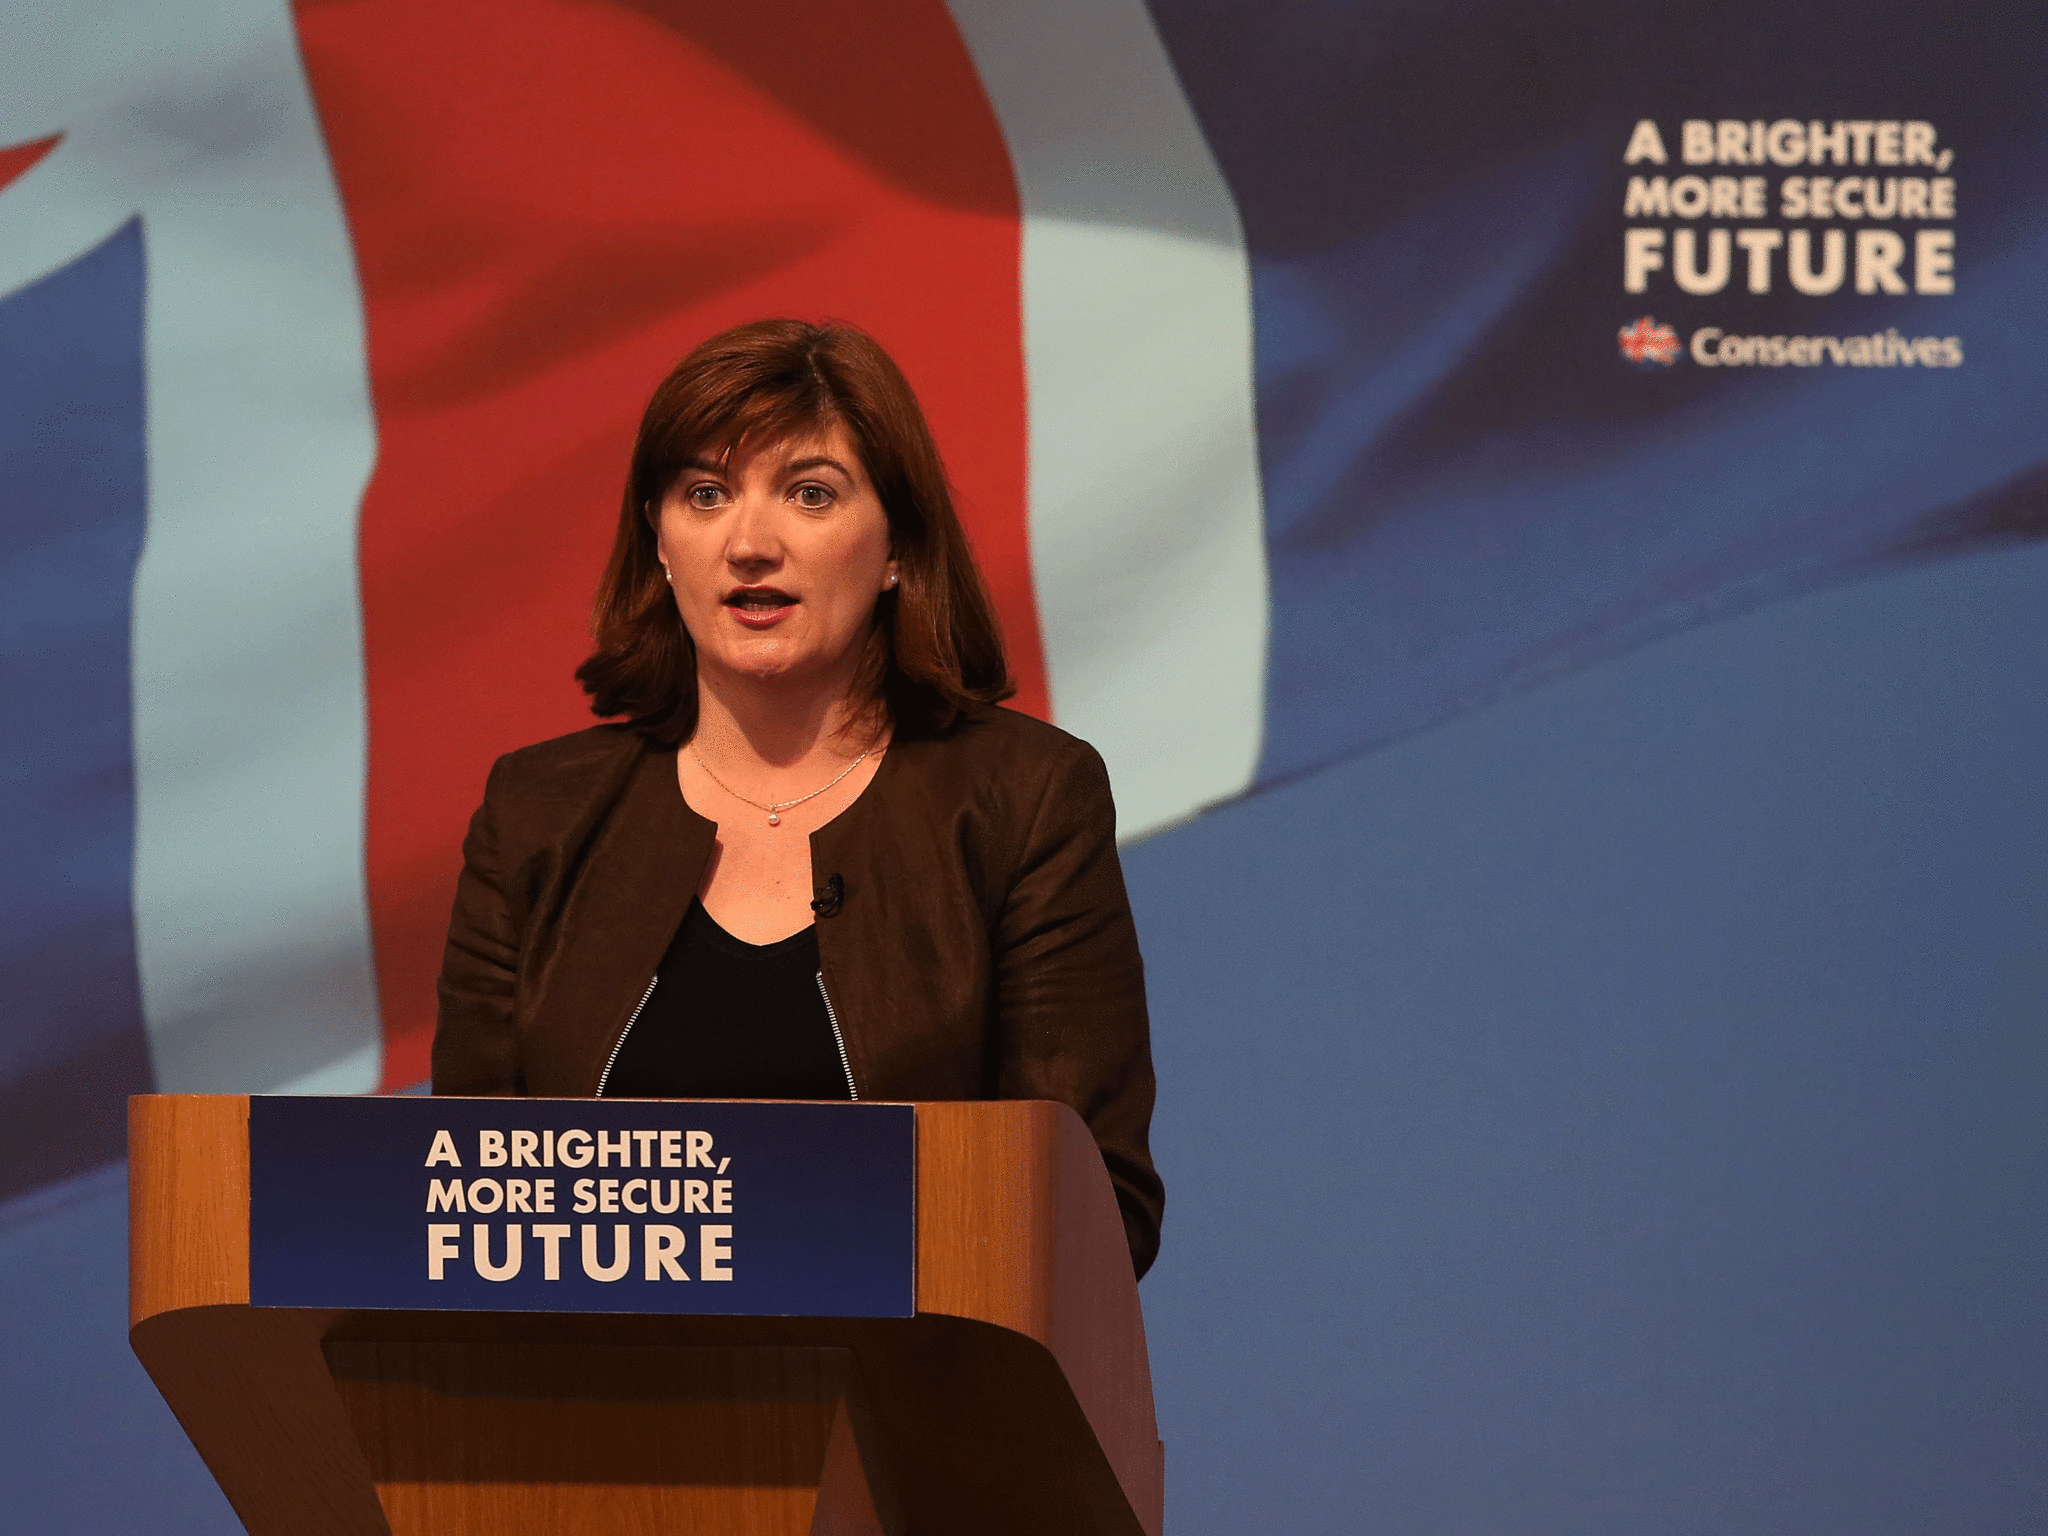 Teachers are not happy Nicky Morgan has been reappointed